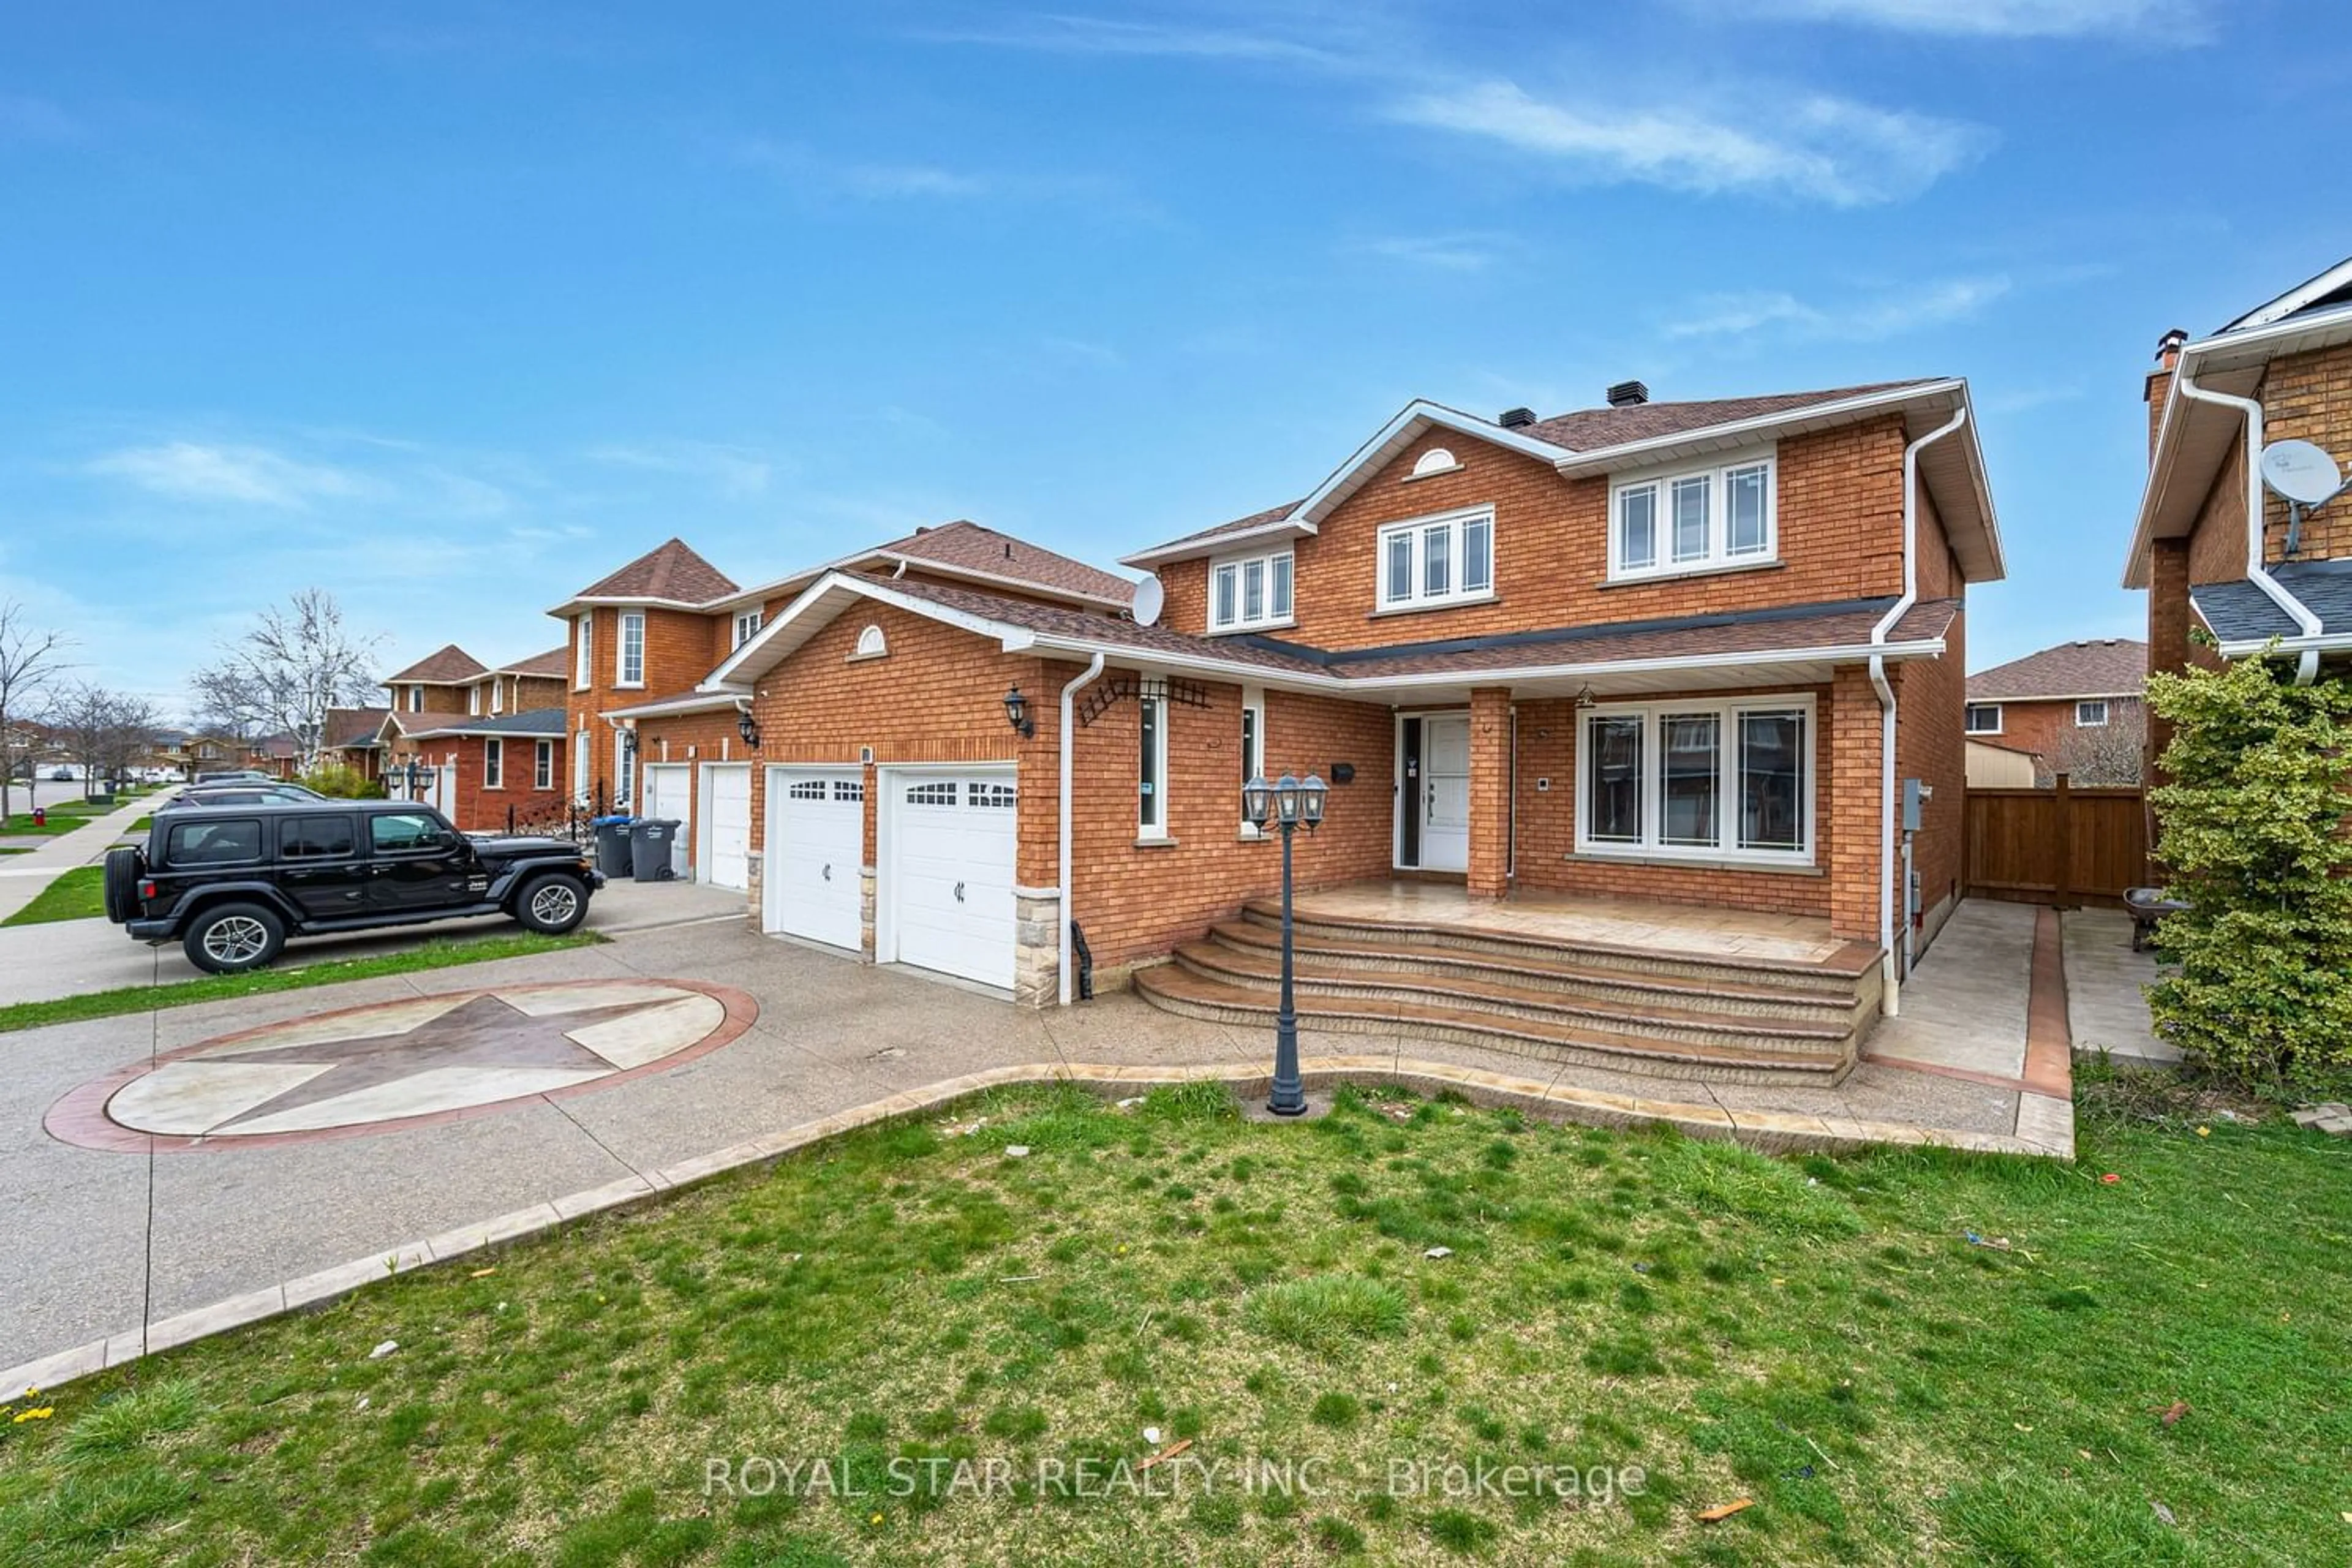 Home with brick exterior material for 10 Hedgerow Ave, Brampton Ontario L6Y 3C6